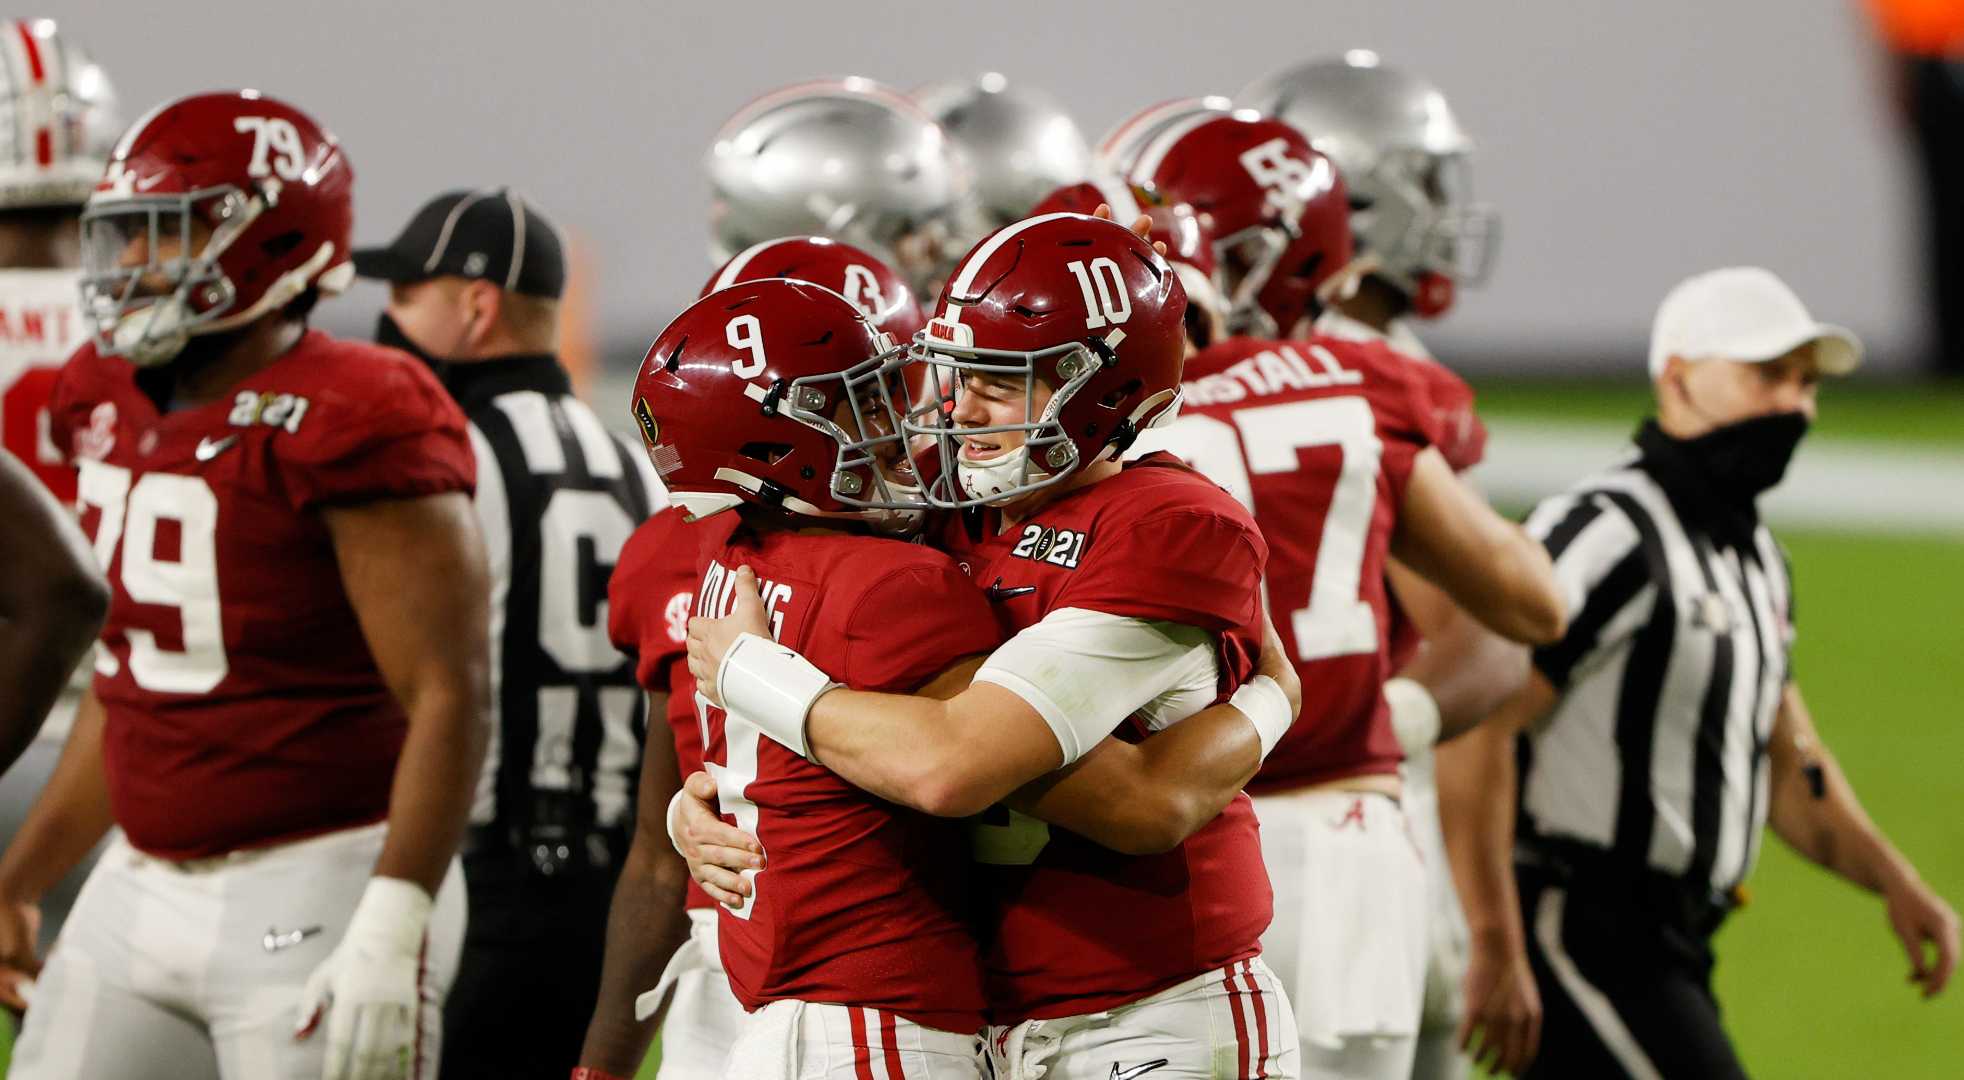 Mac Jones #10 of the Alabama Crimson Tide hugs Bryce Young #9 after being taken out of the game during the fourth quarter against the Ohio State Buckeyes of the College Football Playoff National Championship game at Hard Rock Stadium on January 11, 2021 in Miami Gardens, Florida. (Photo by Sam Greenwood/Getty Images)